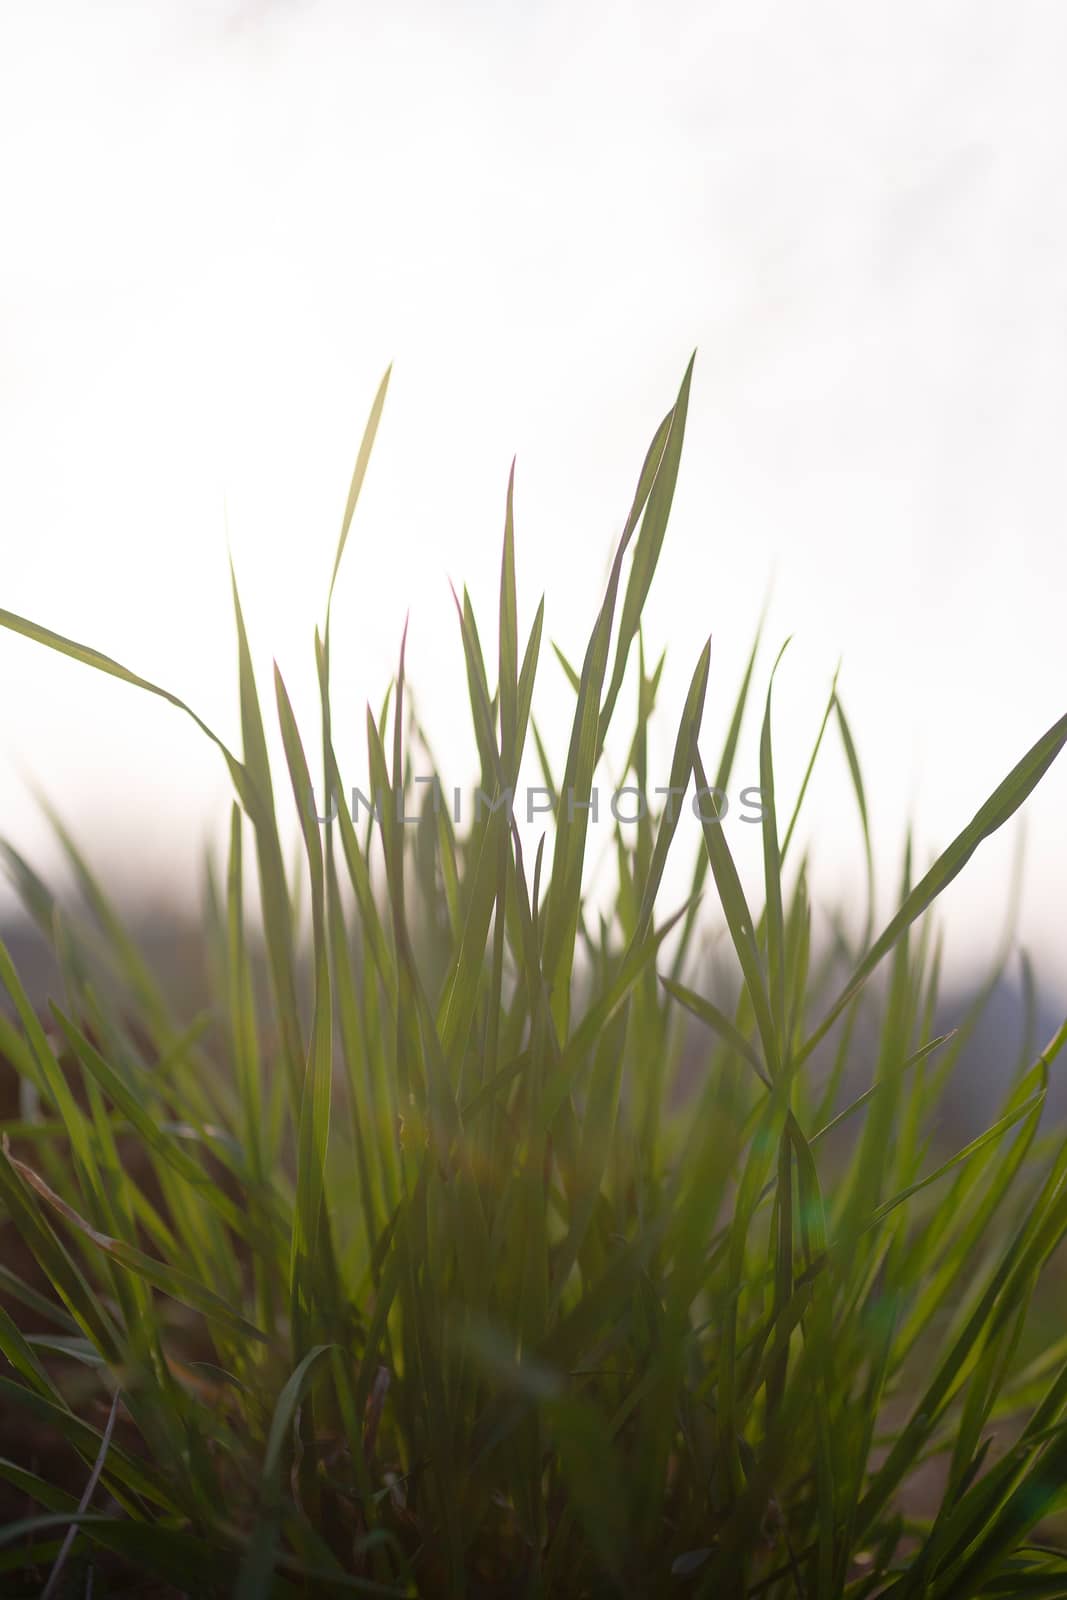 A grass opposite the sun on blurred background by alexsdriver